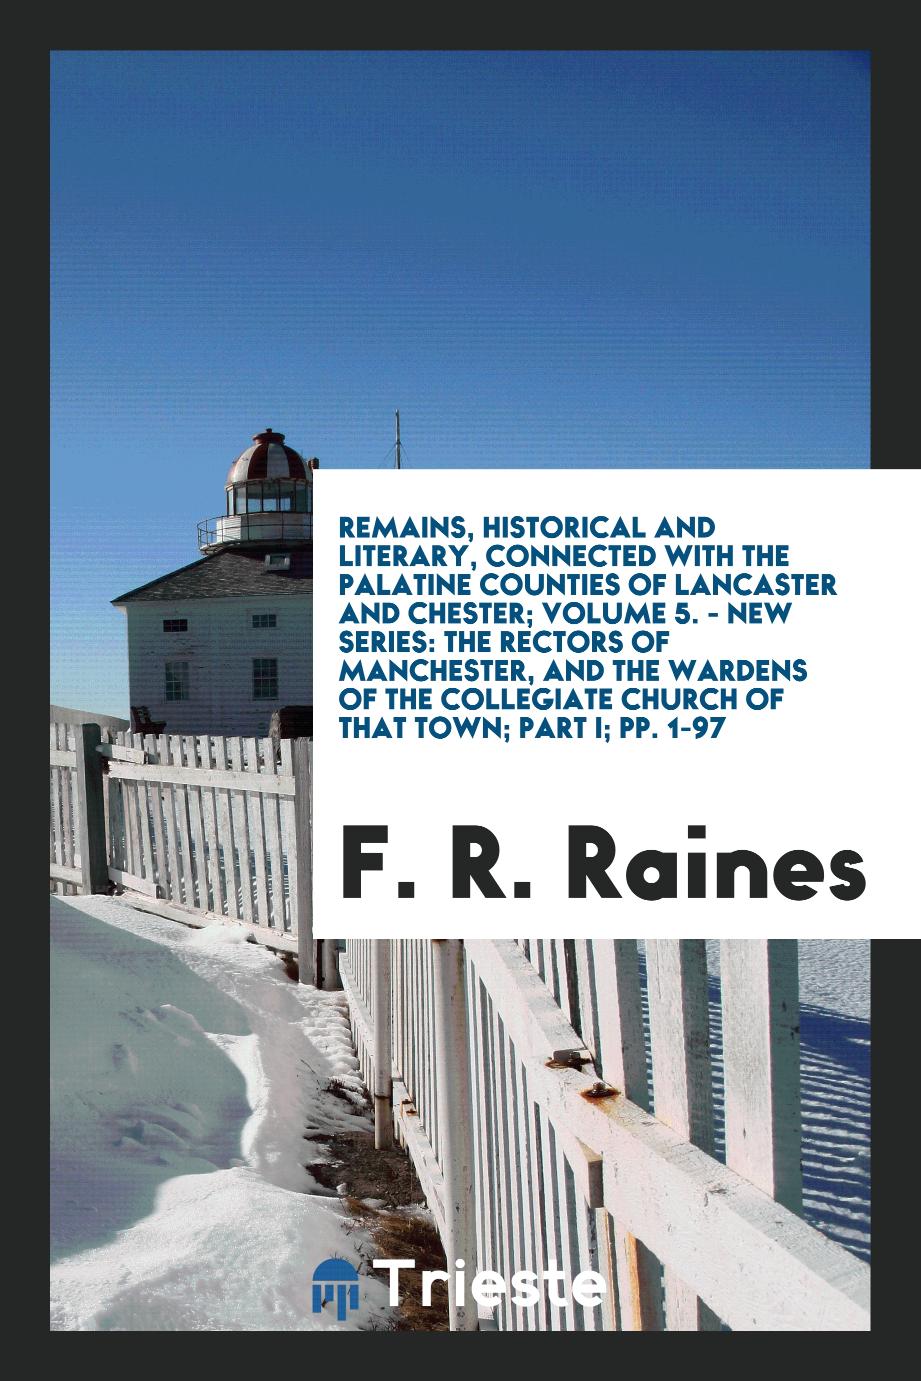 Remains, Historical and Literary, Connected with the Palatine Counties of Lancaster and Chester; Volume 5. - New Series: The Rectors of Manchester, and the Wardens of the Collegiate Church of That Town; Part I; pp. 1-97